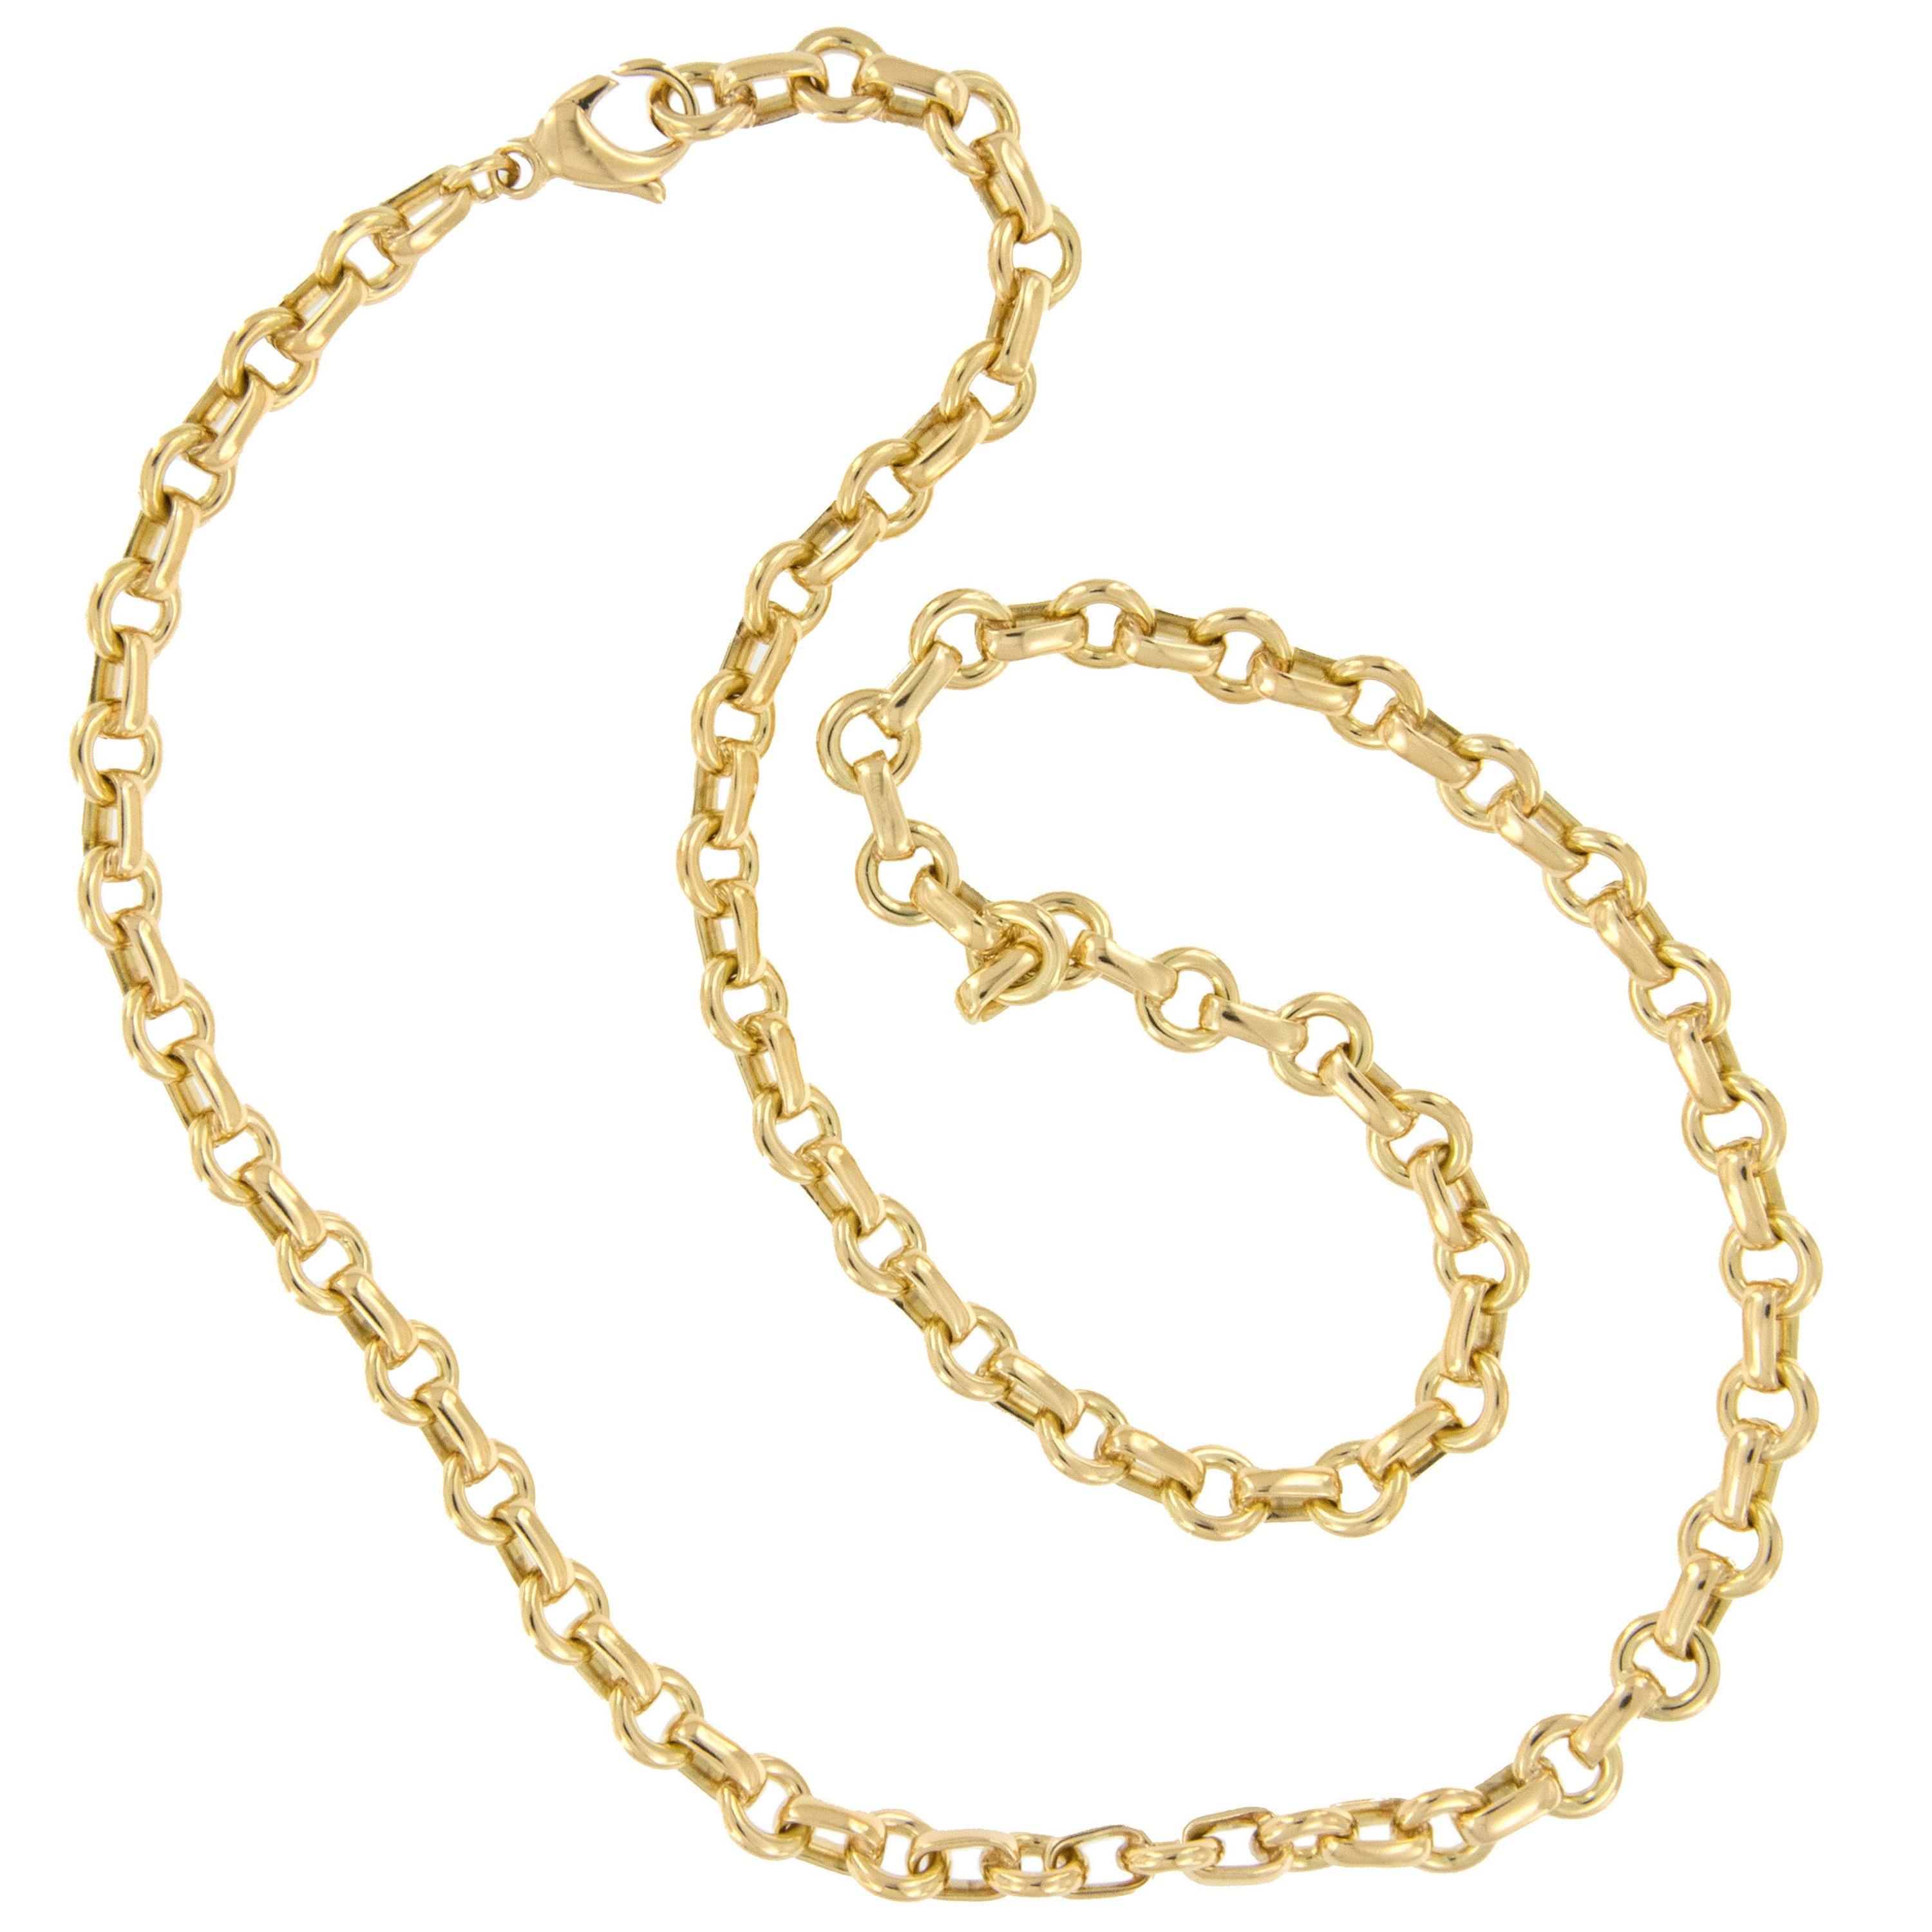 Necklace Pendant Chain Real 18k Yellow G/F Gold Ladies Fine Link Design 18"